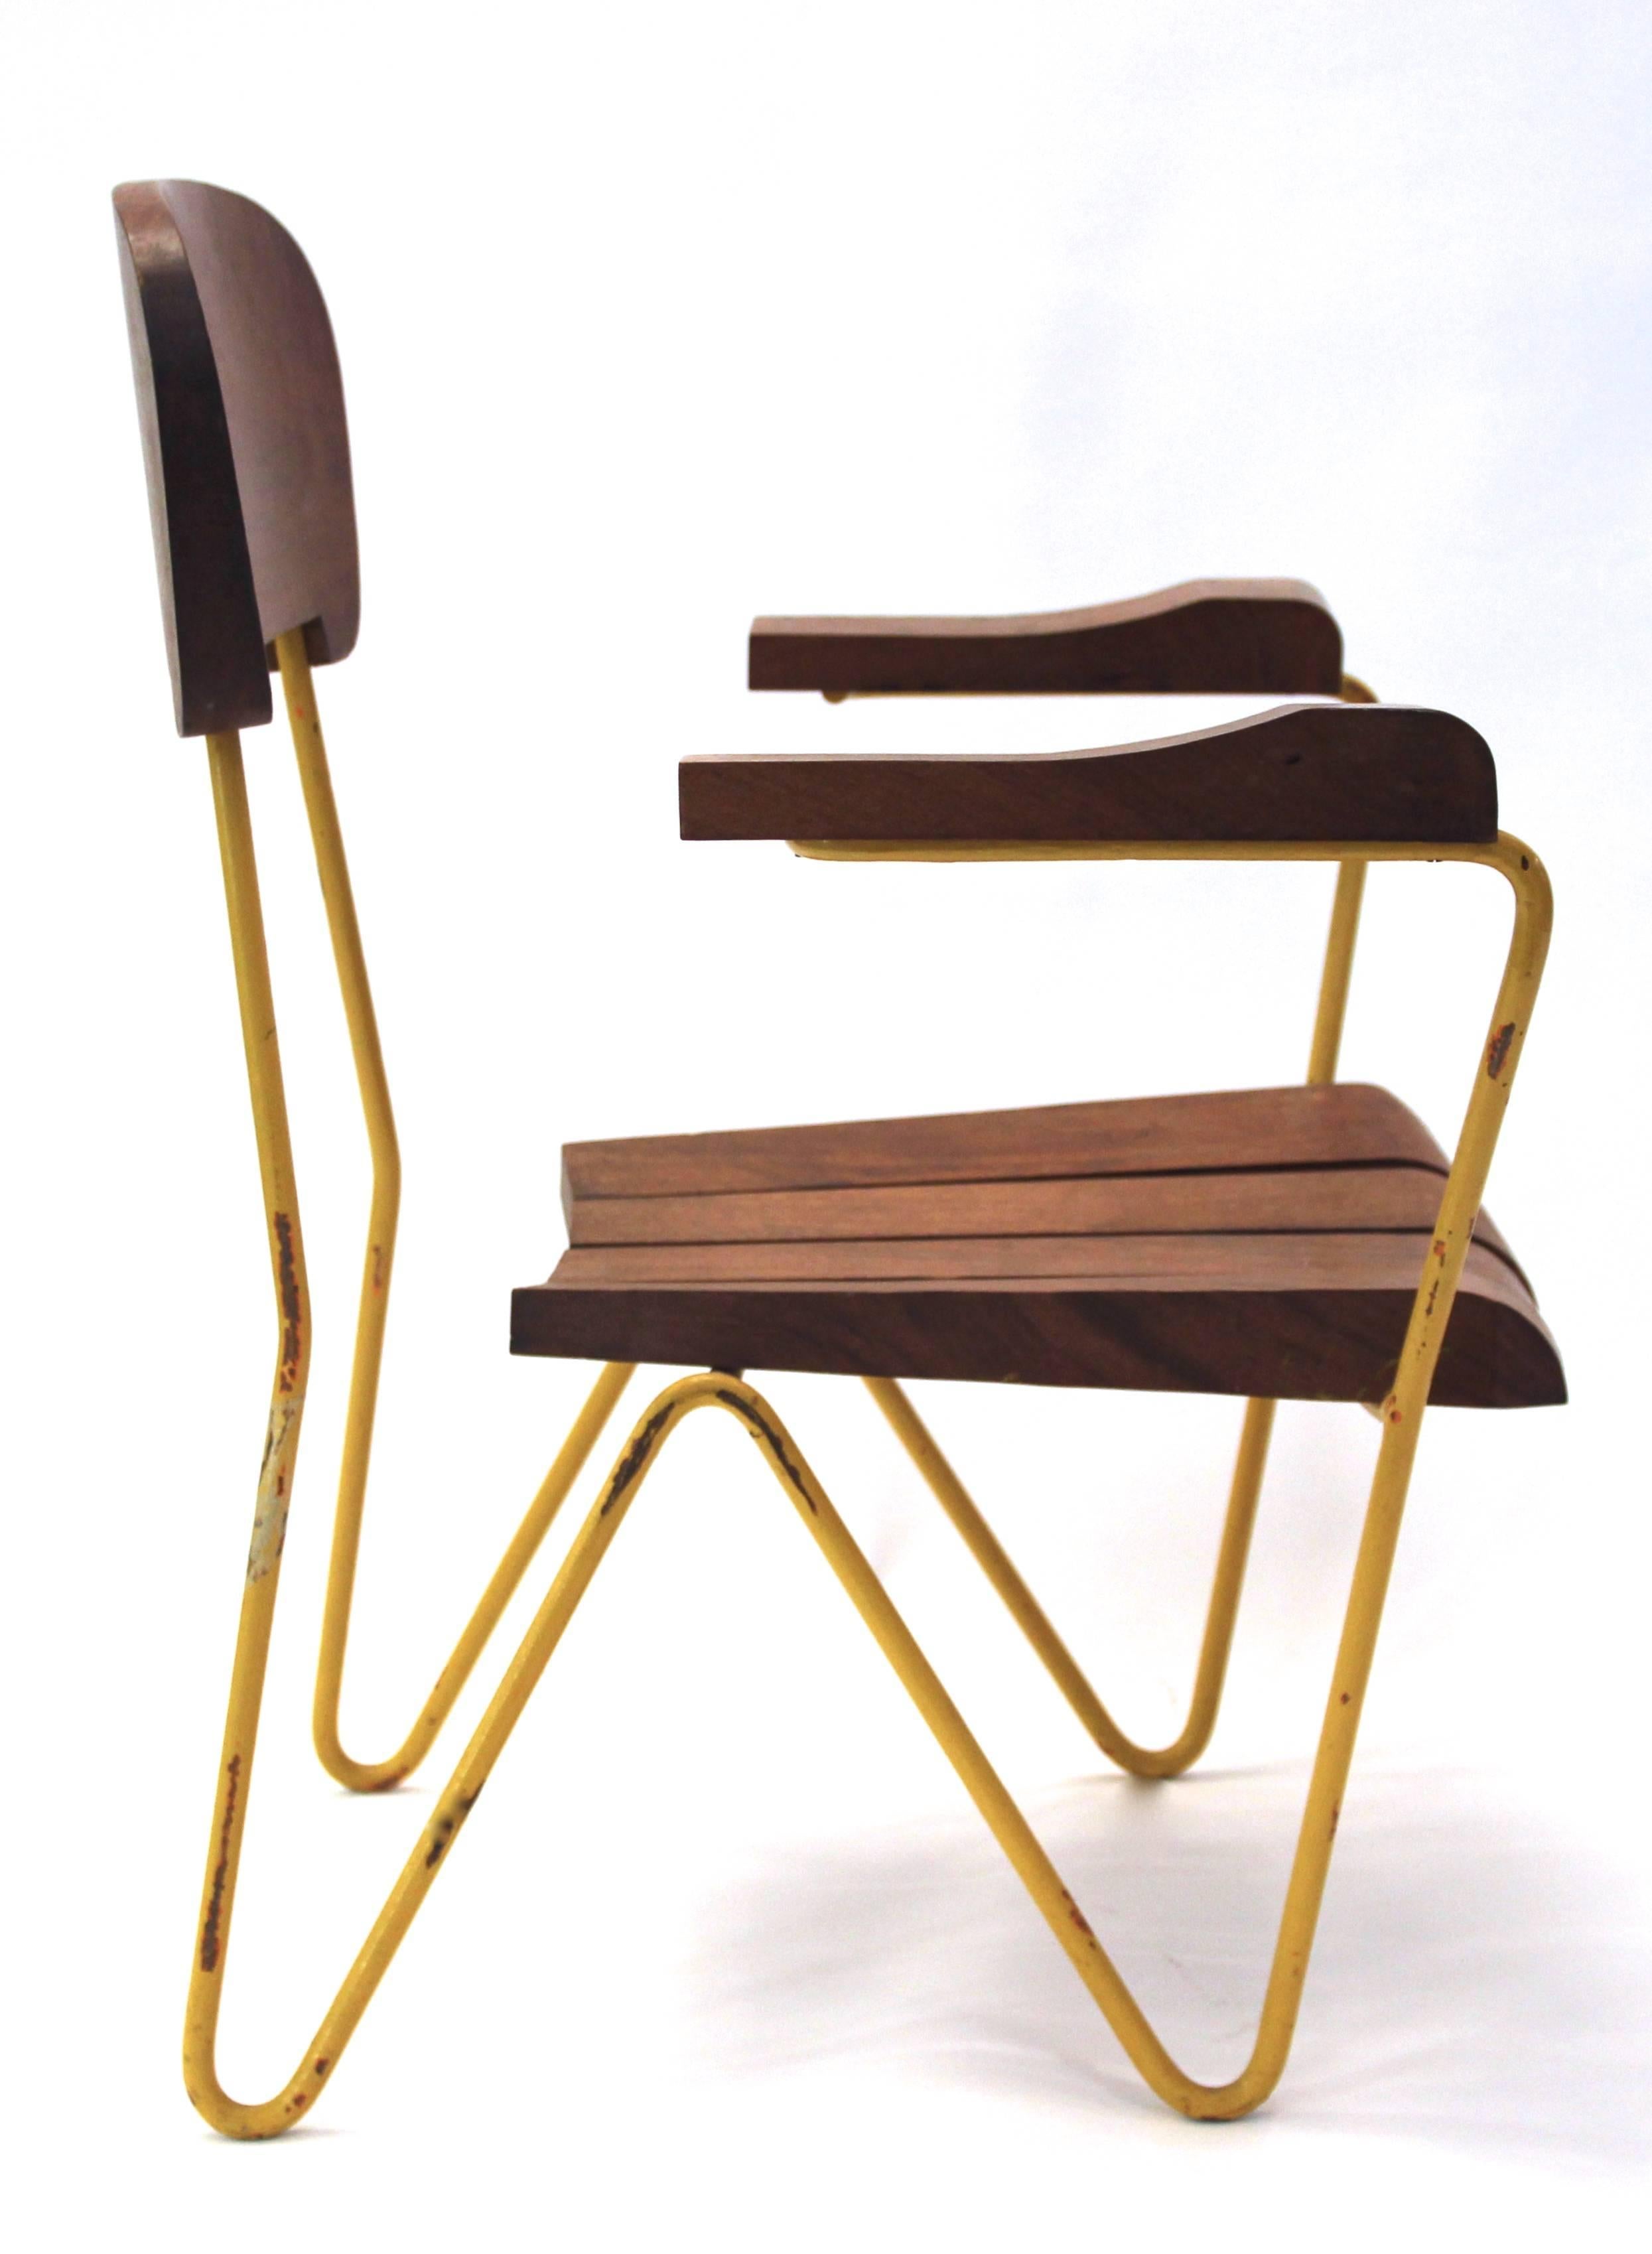 César Janello (1918-1985).
Set of four armchairs.
Wood and metal,
circa 1955, Brazil.
Measures: Height 83cm, seat height 33 cm,
width 68 cm, depth 60 cm.